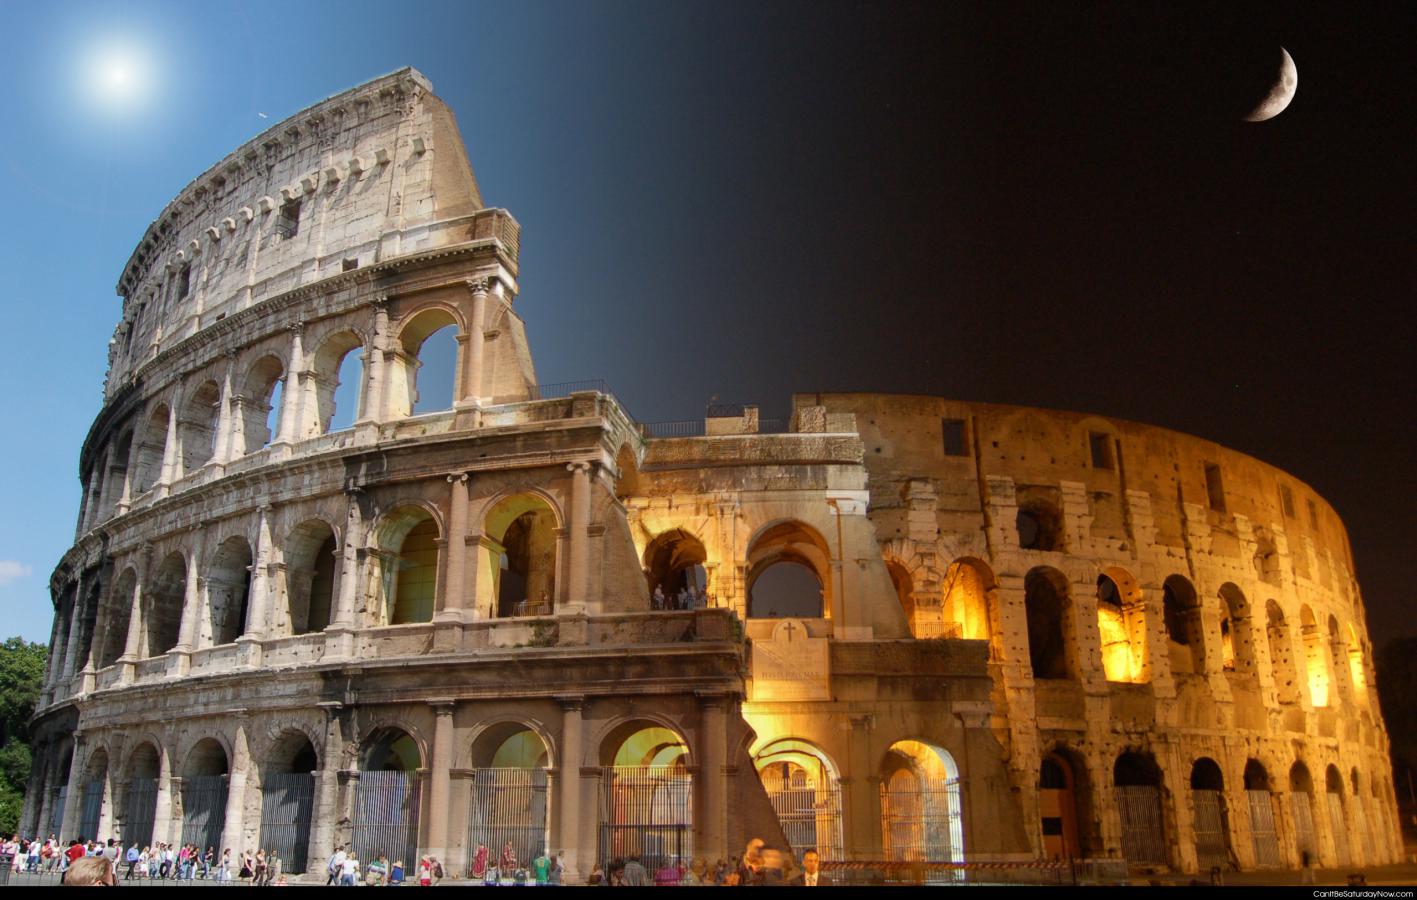 Colosseum day and night - cool photoshop job of the Colosseum at day and night